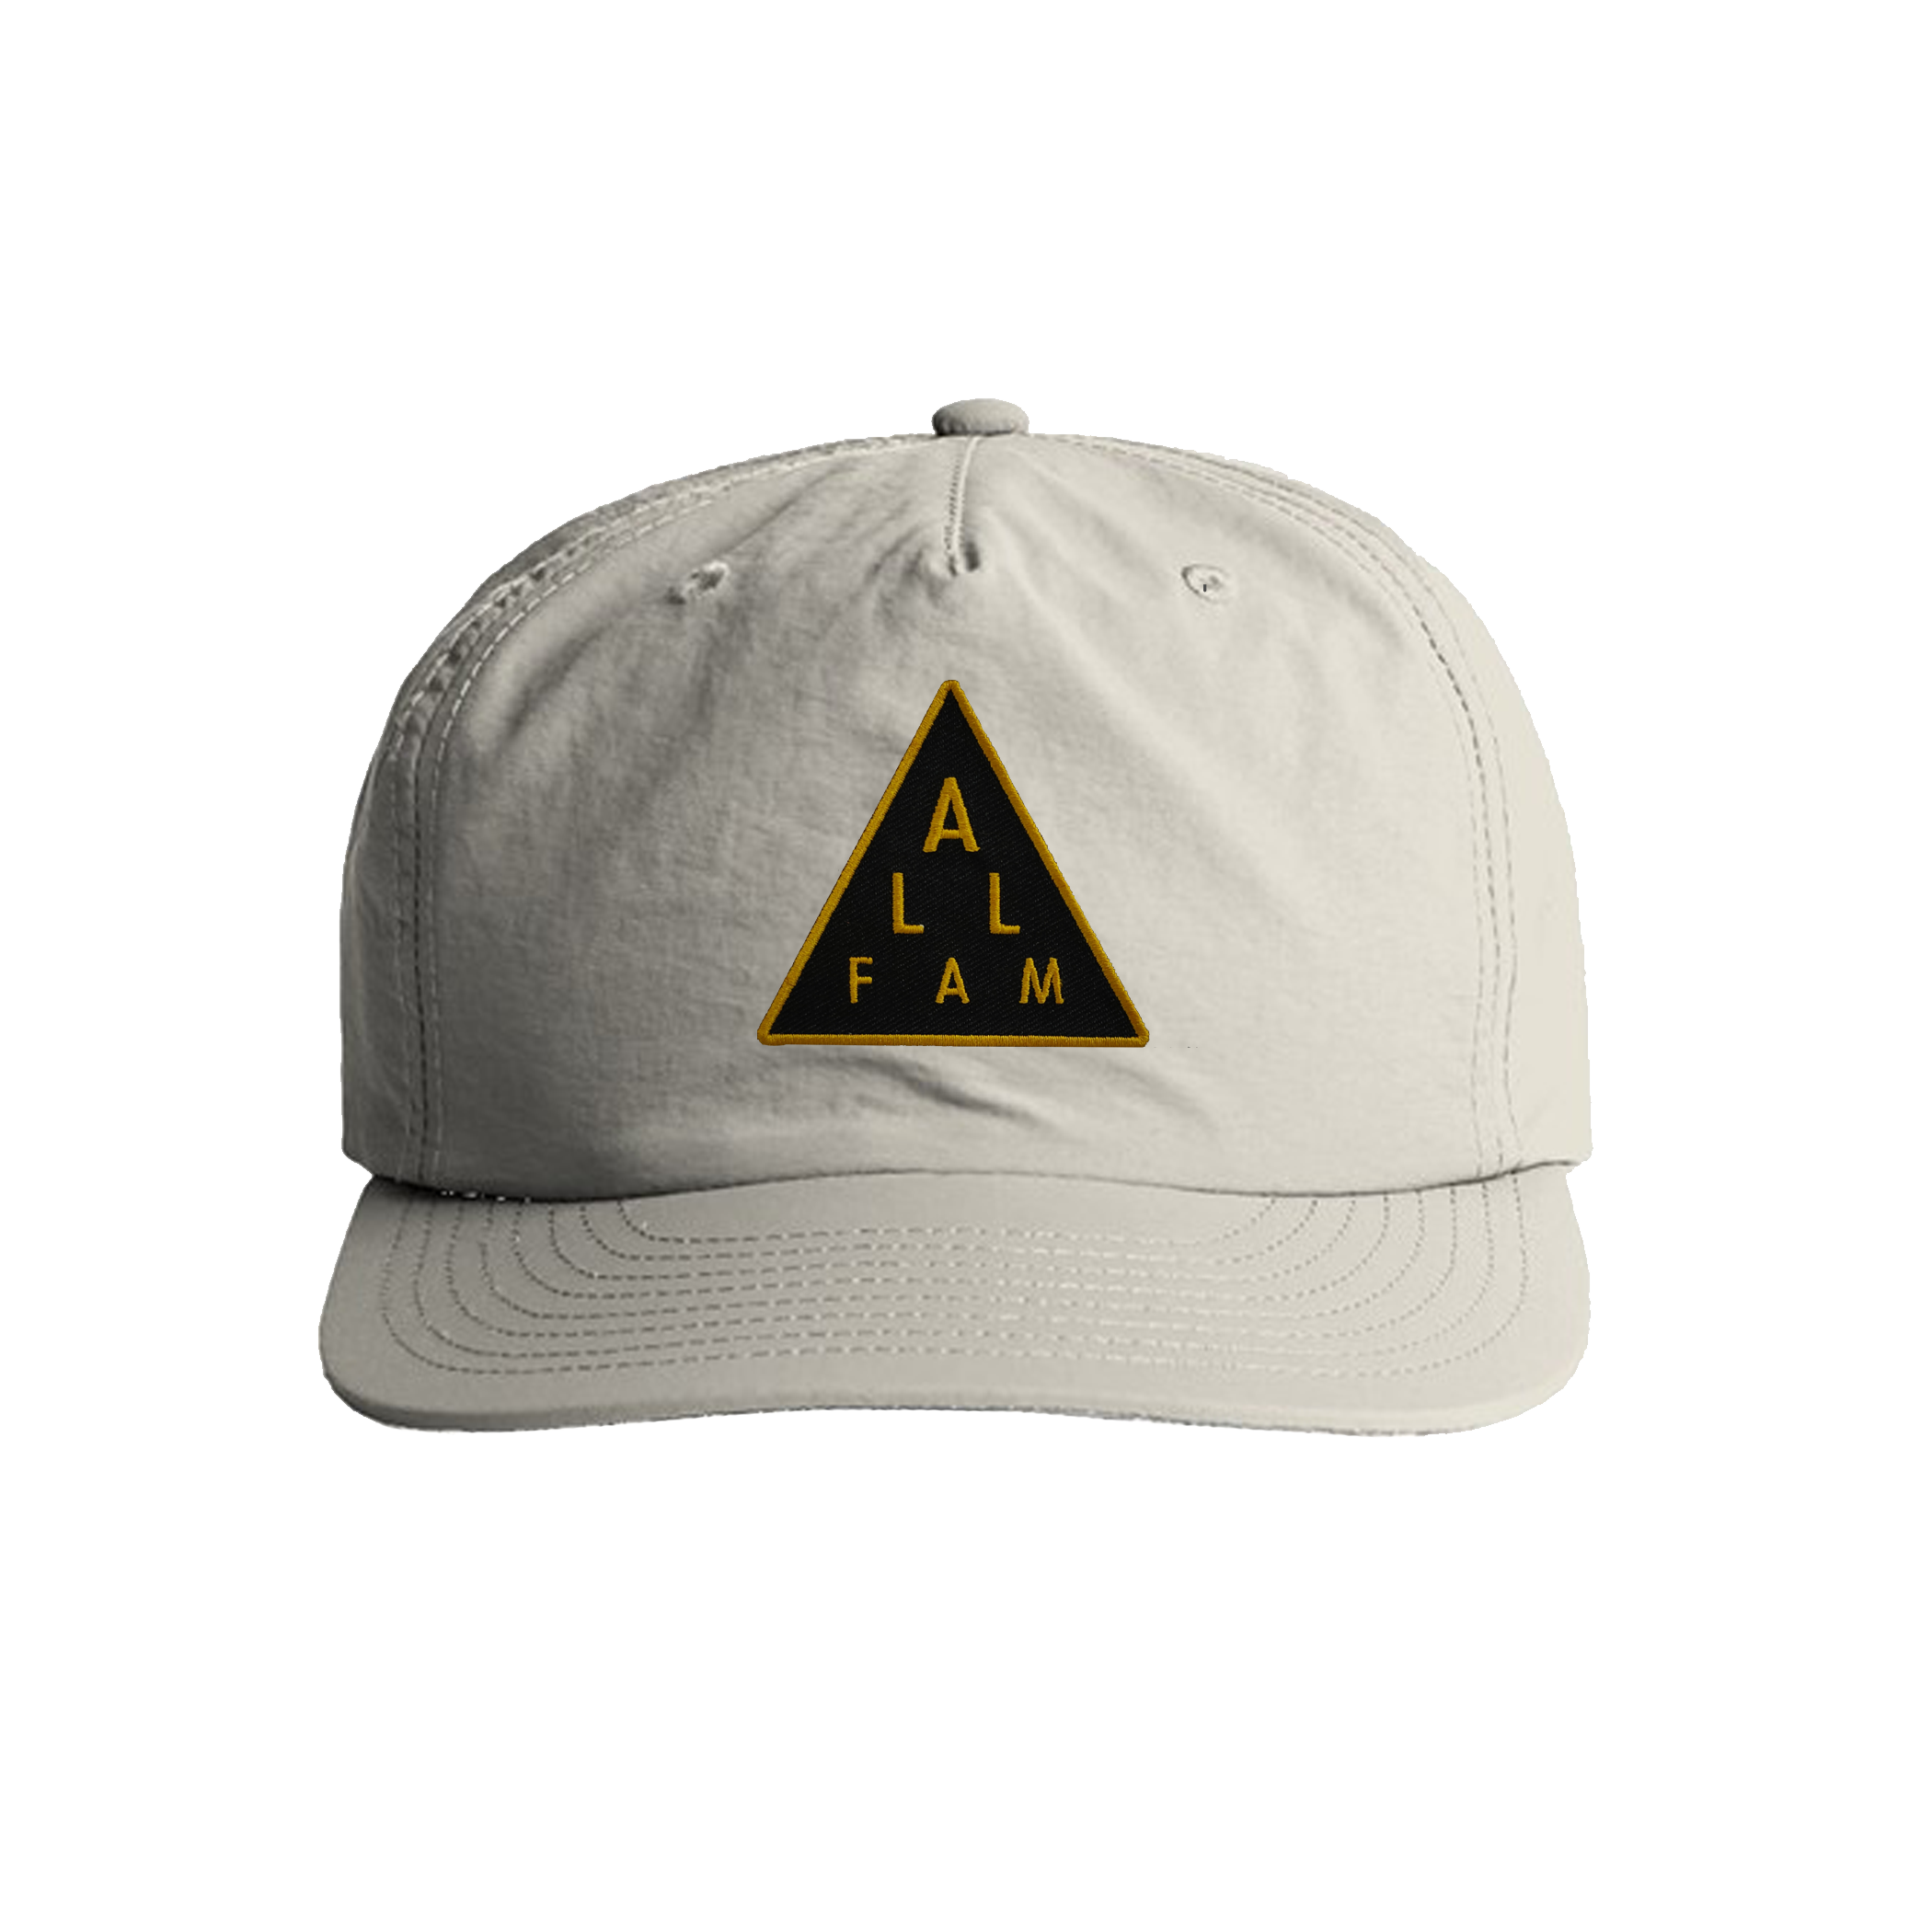 2” TRIANGLE PATCH KIDS HAT WHT